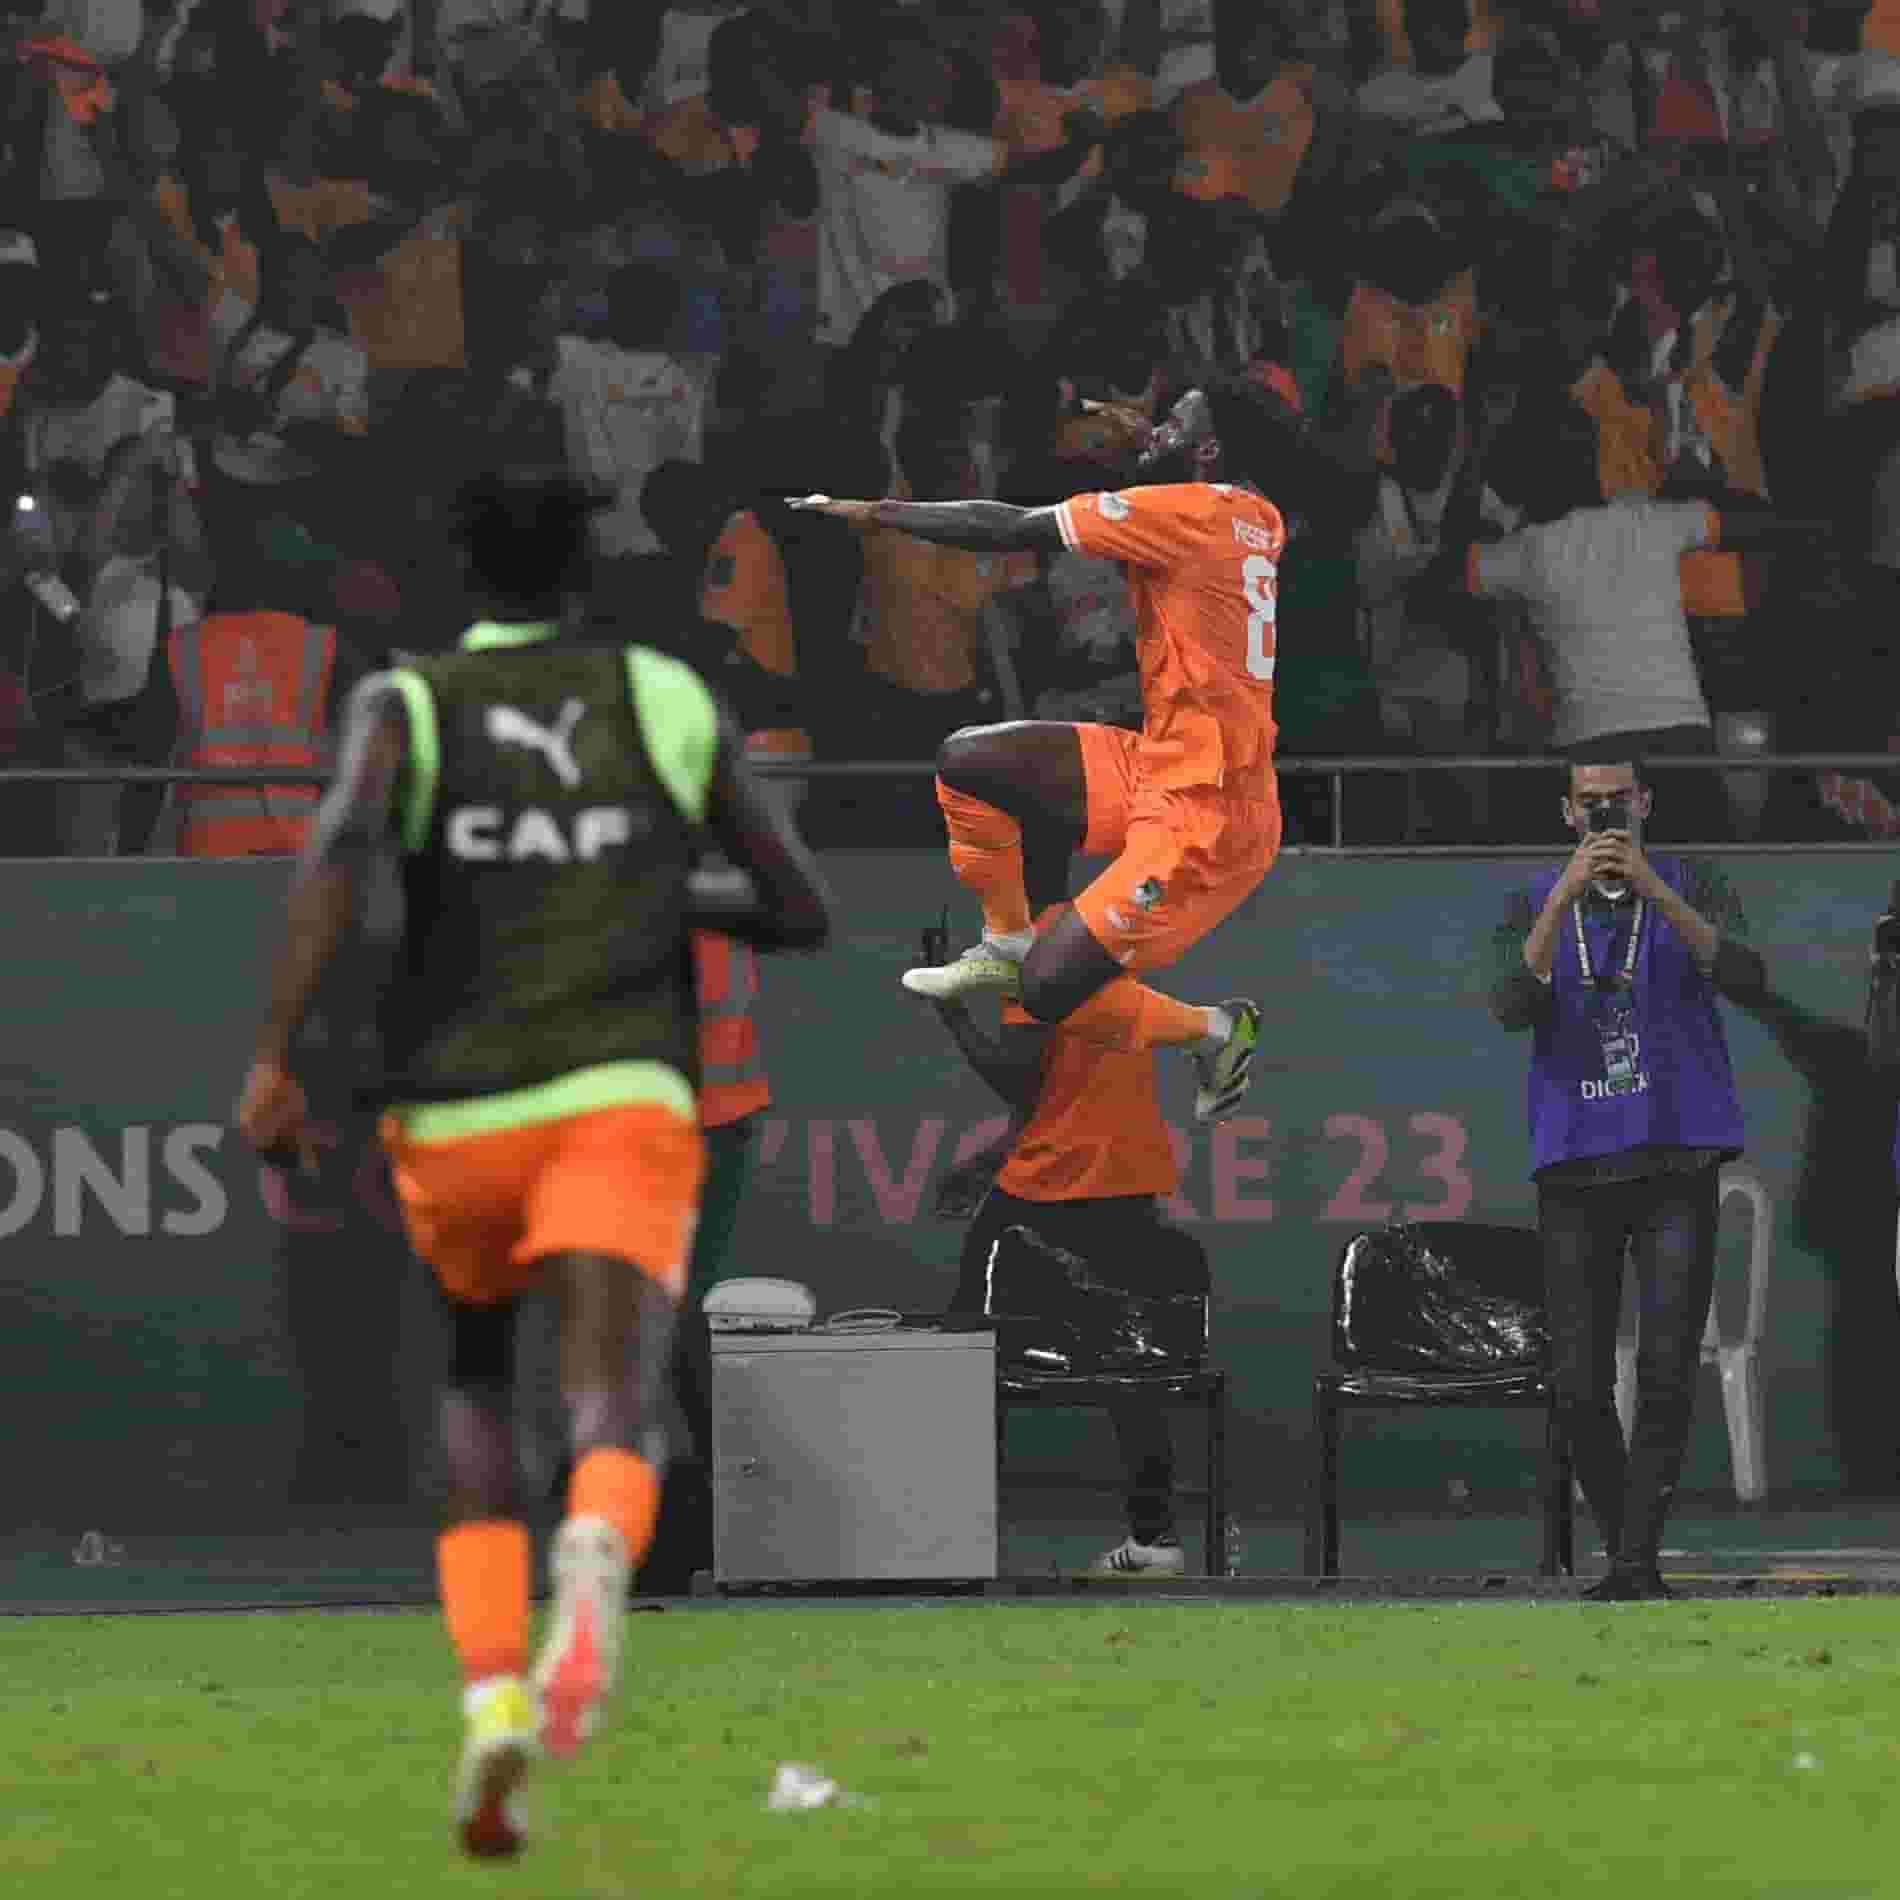 Ivory Coast emerged victorious in a tense penalty shootout against defending champions Senegal, securing a spot in the Africa Cup of Nations quarter-finals.